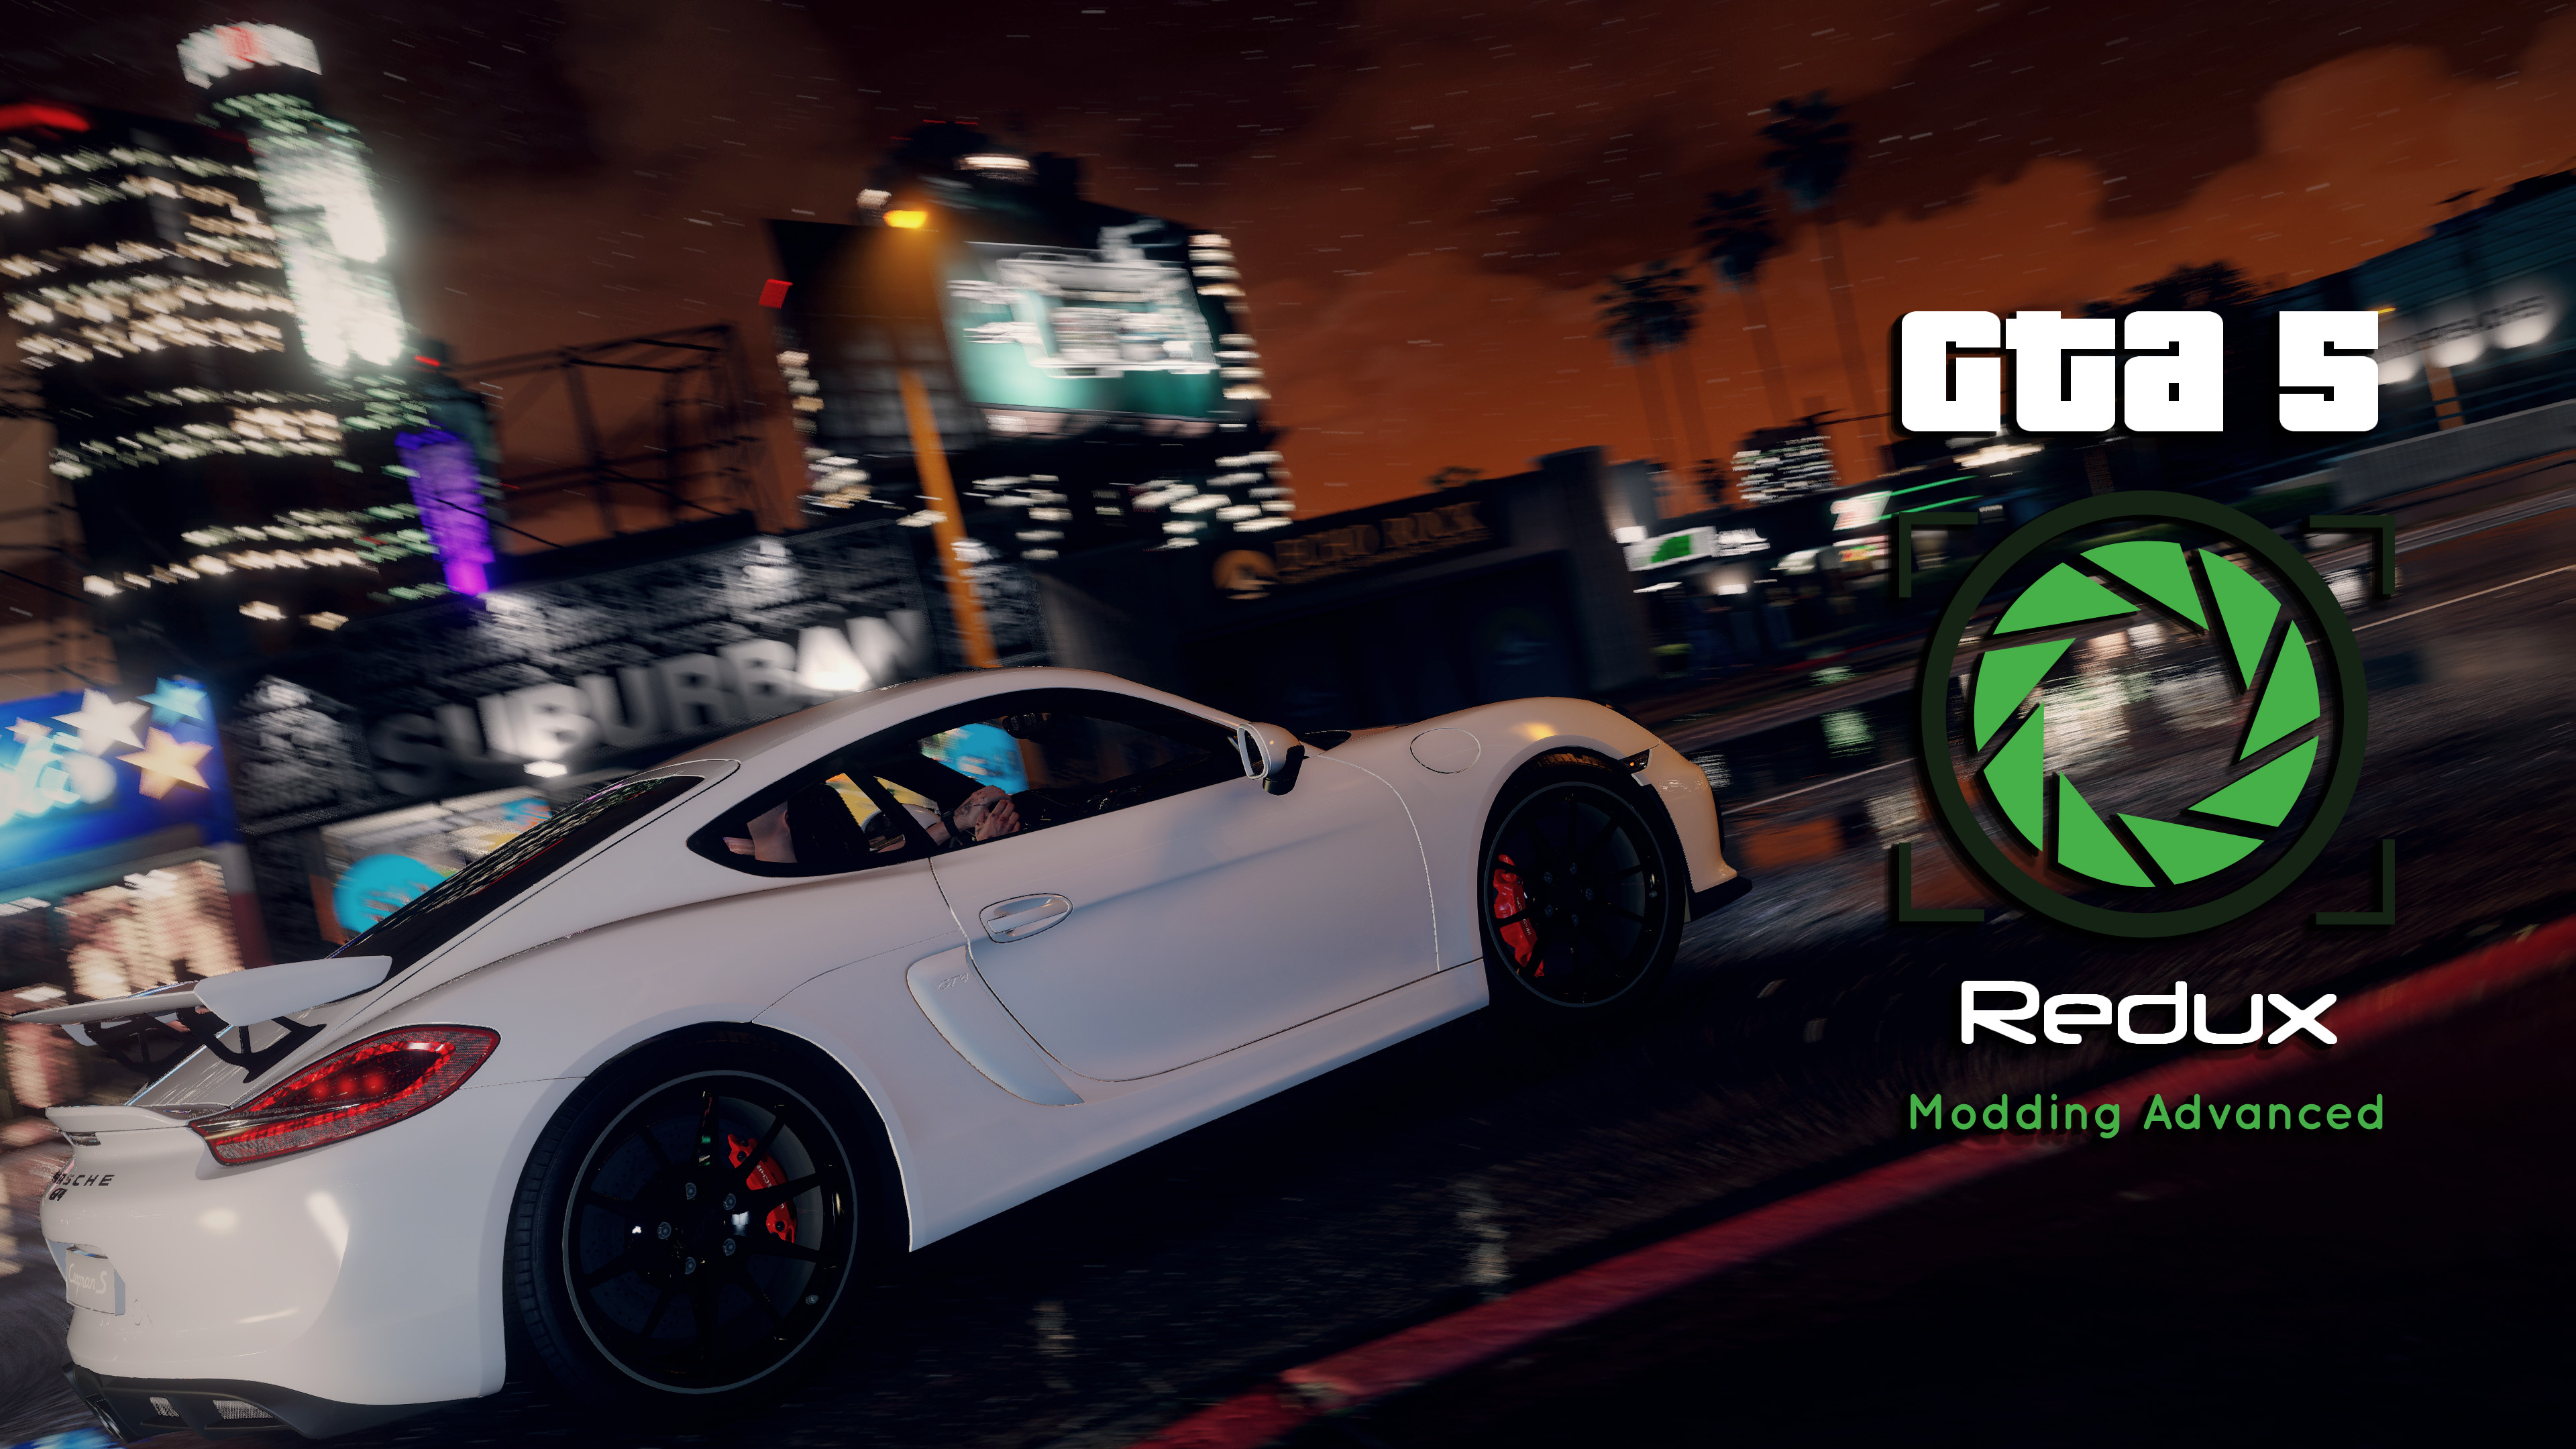 gta 5 redux mod system requirements